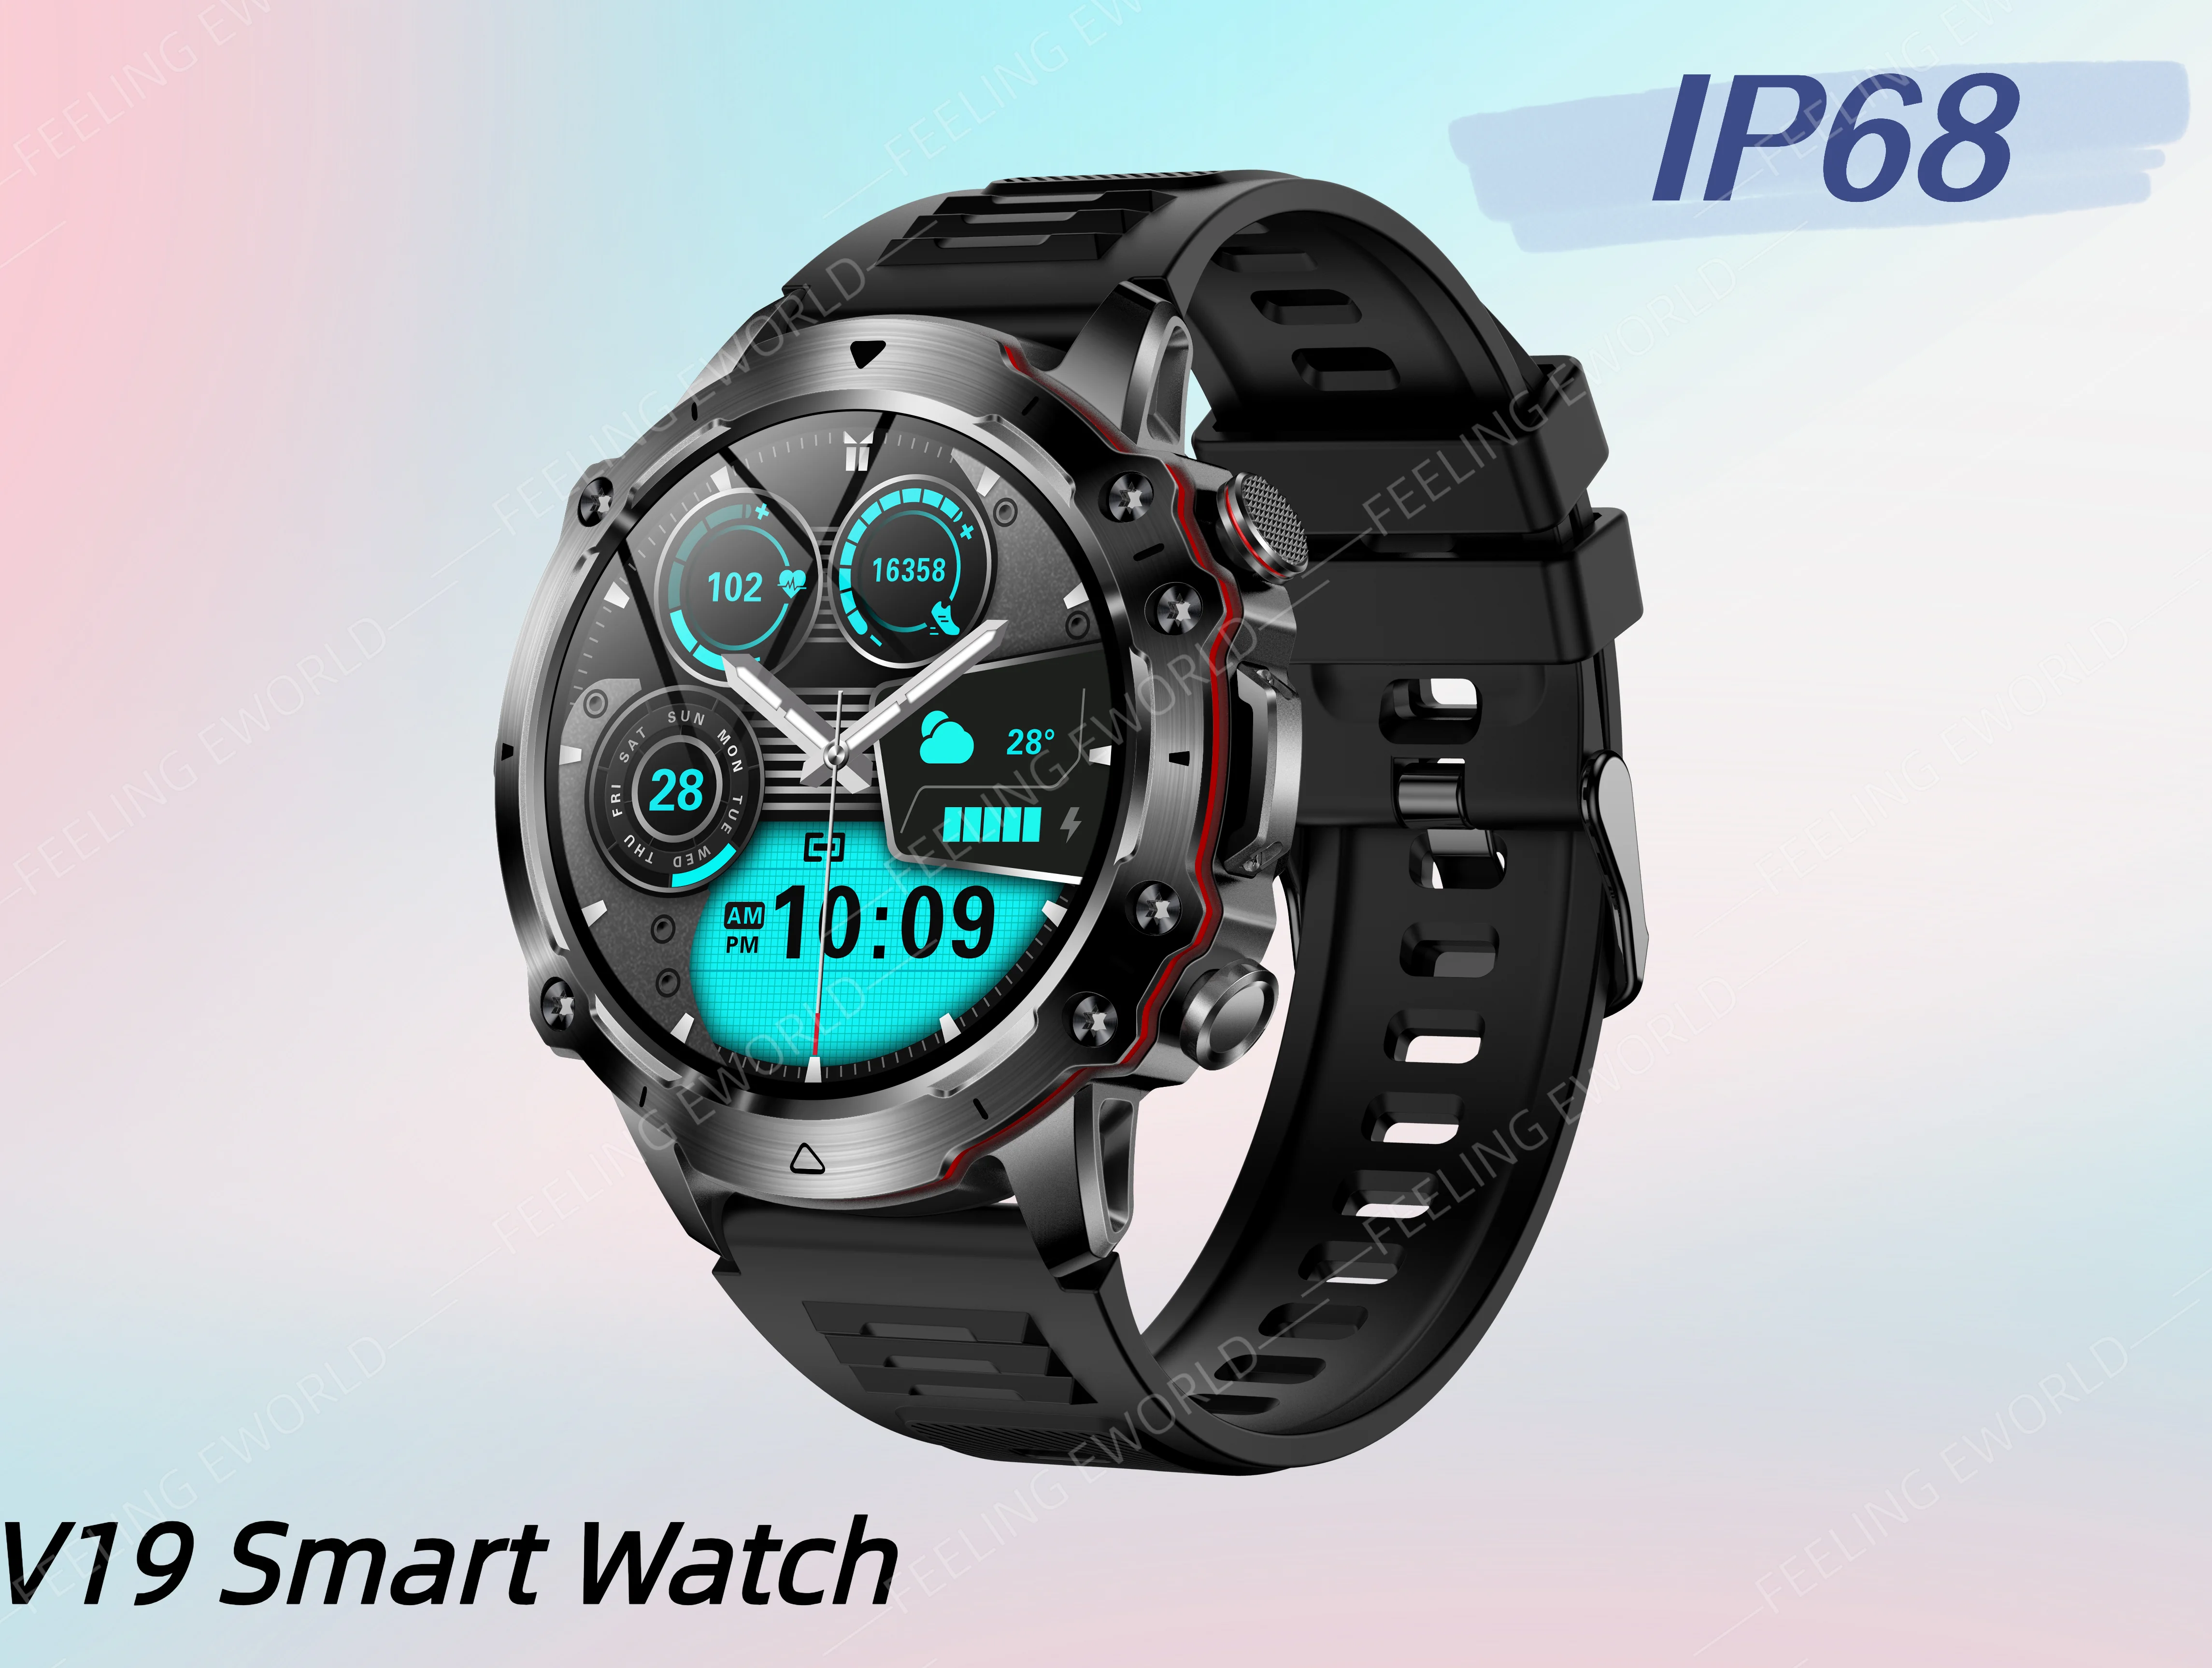 

New V91 Smart Watch 1.52-inch HD Screen With Bluetooth Call Heart Rate Blood Pressure Monitoring NFC Outdoor Sports Smartwatch